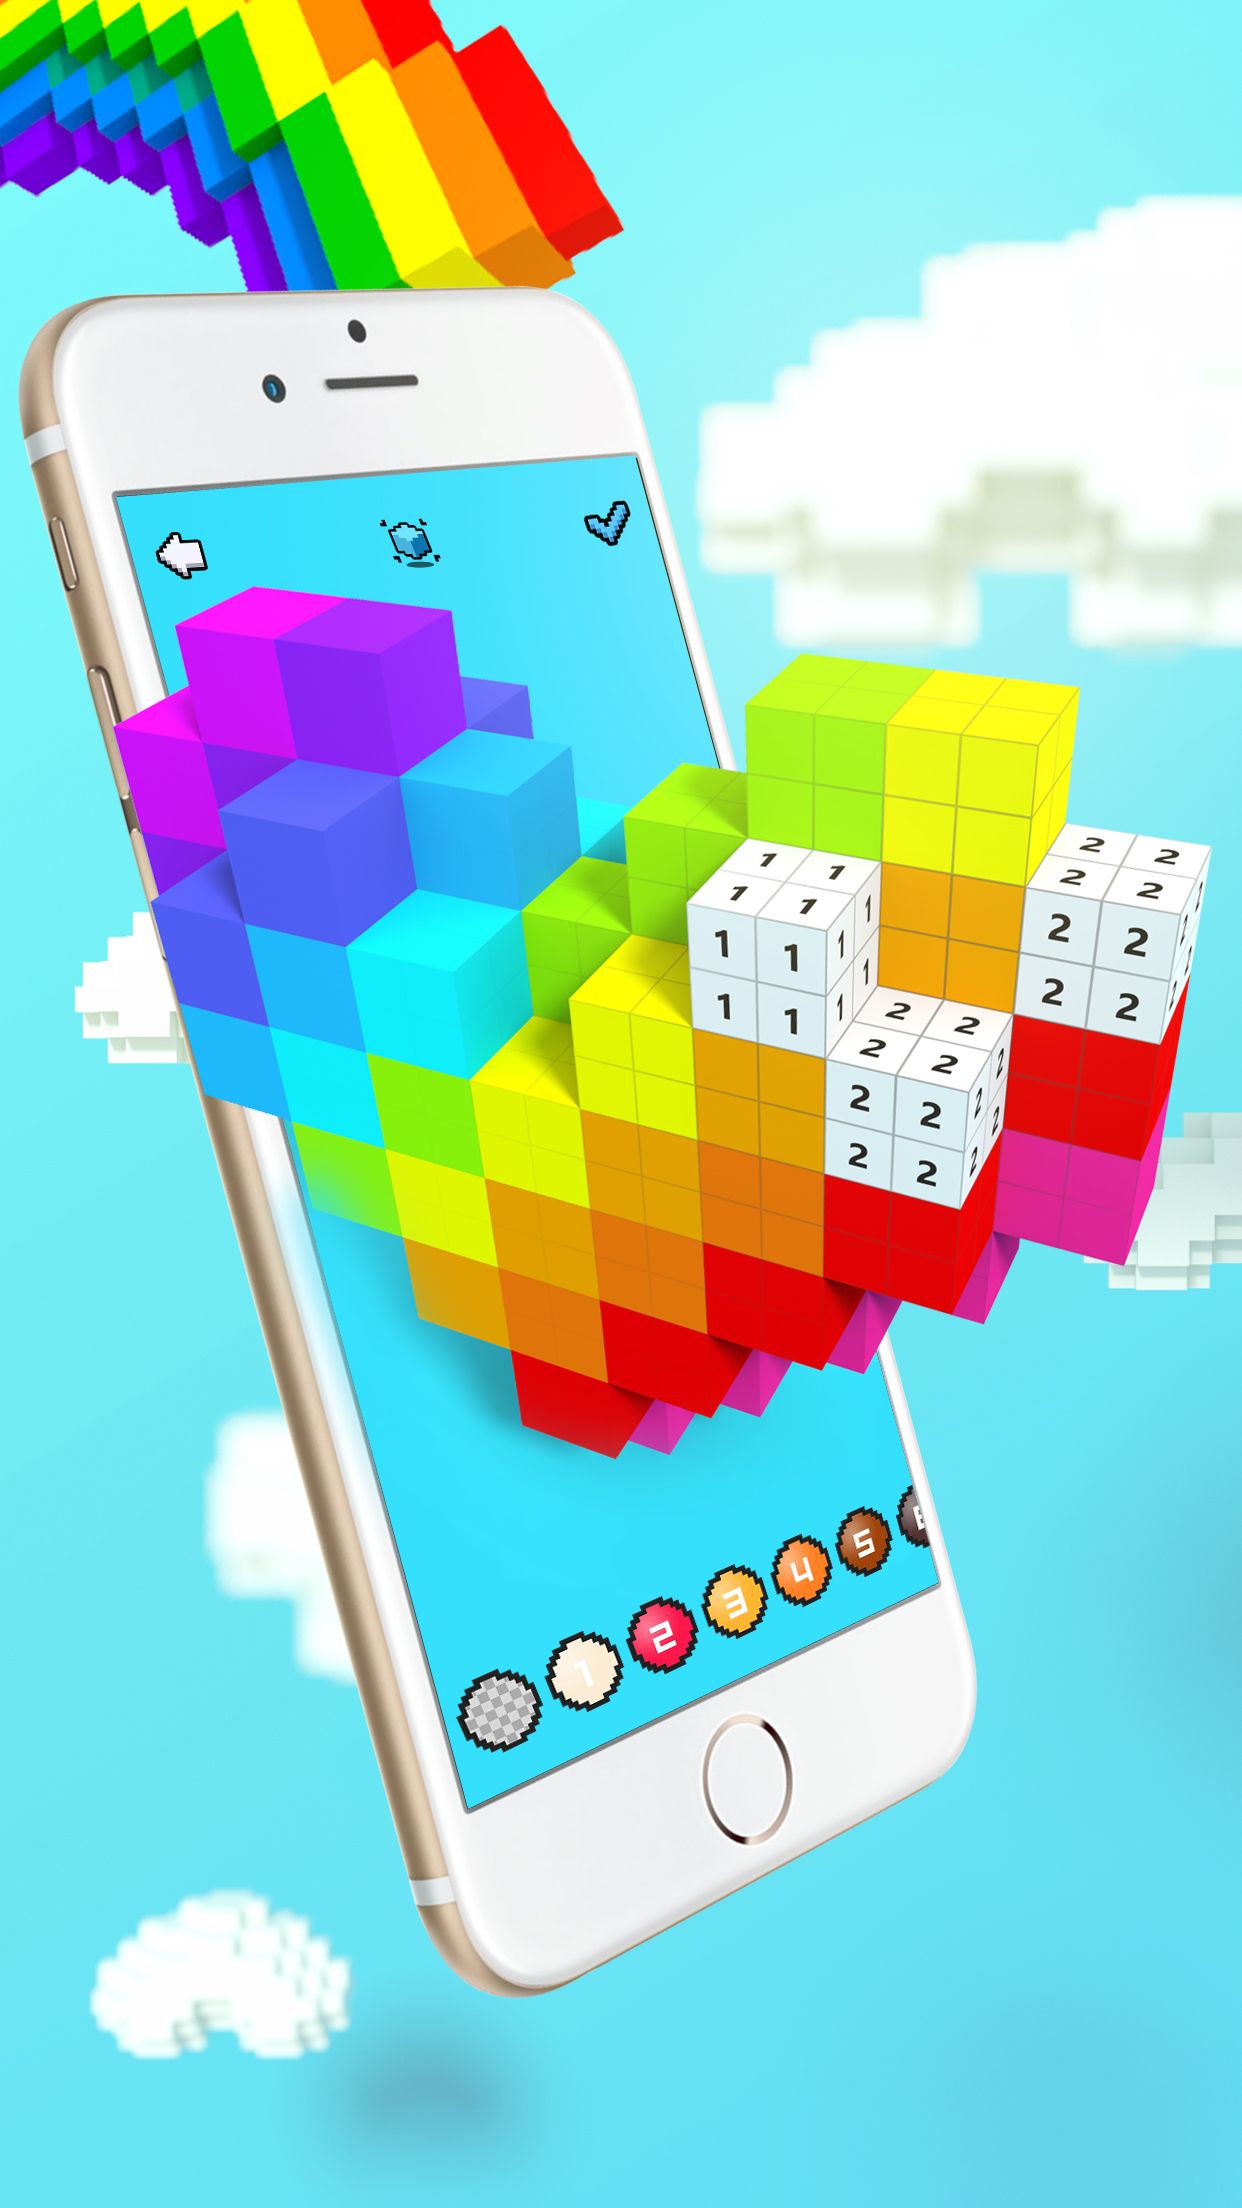 voxel-3d-color-by-number-is-emerging-as-the-ultimate-coloring-by-number-app-currently